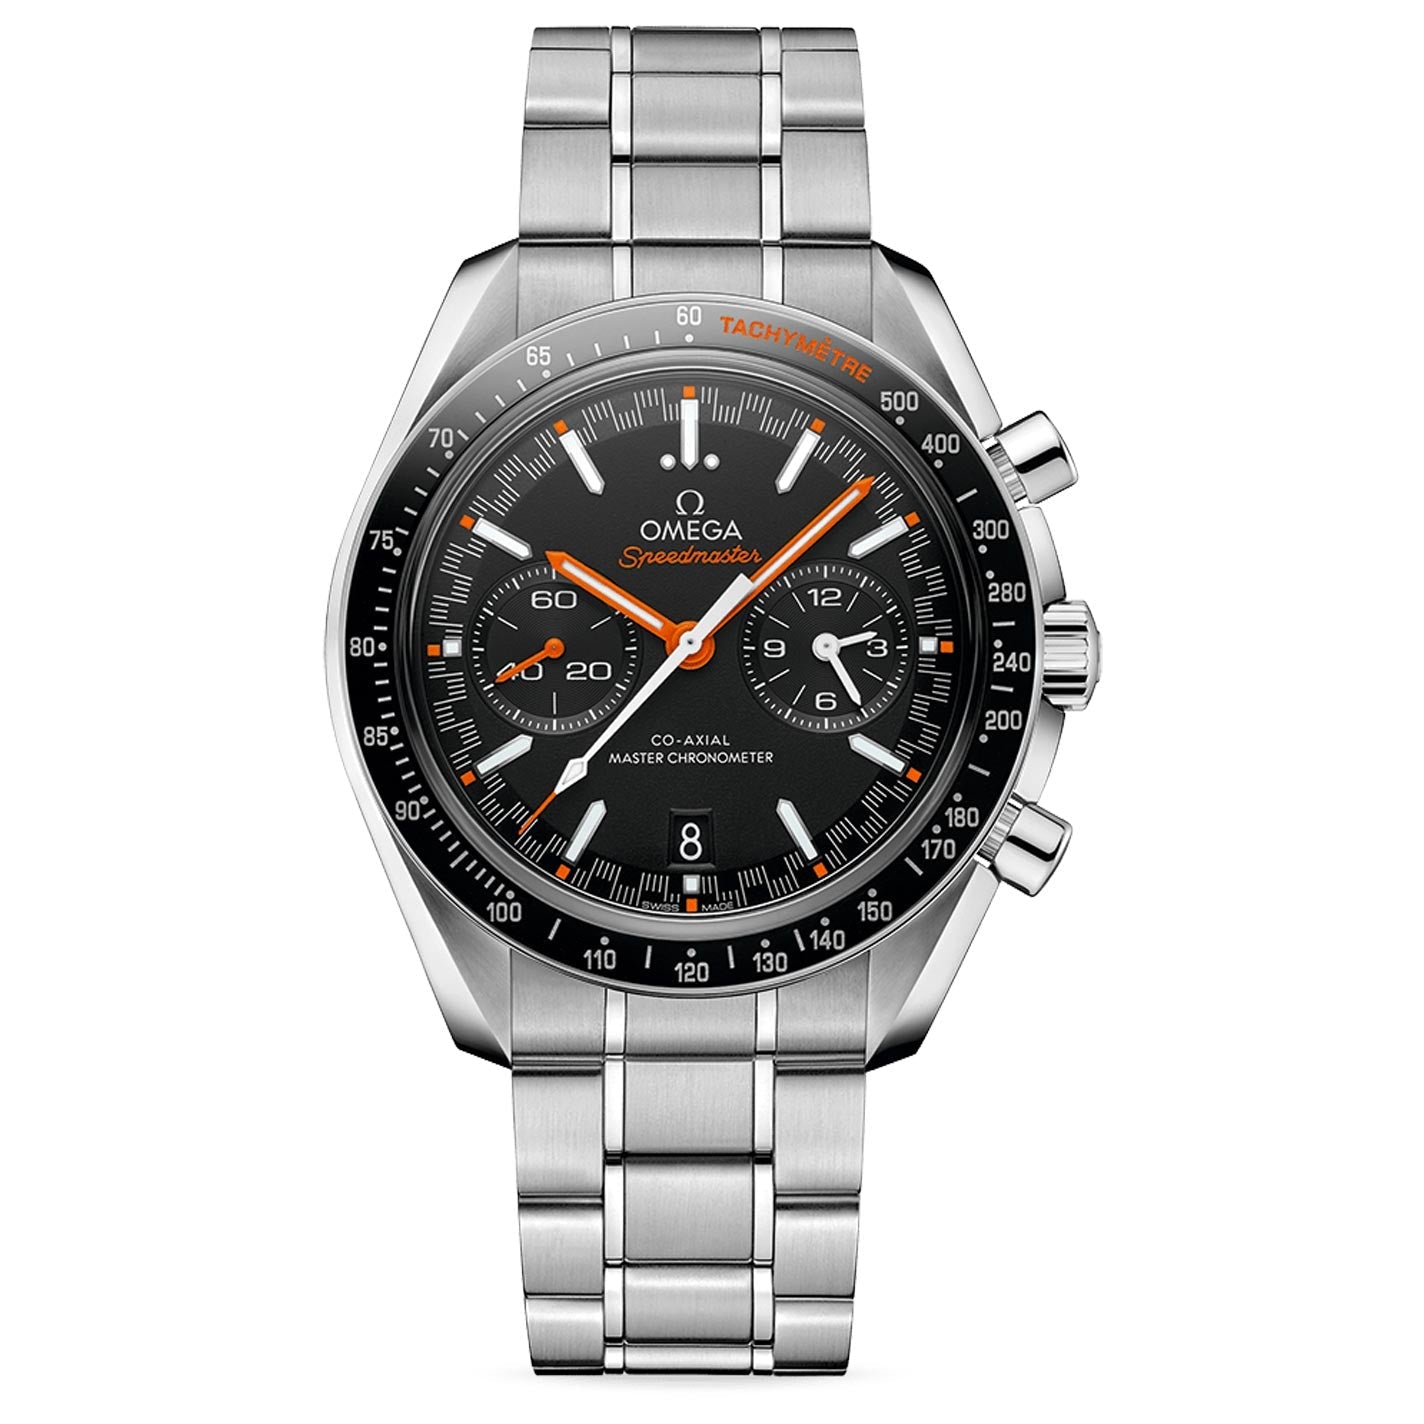 OMEGA Speedmaster Racing Co-axial Master Chronometer Chronograph 44.25mm Watch